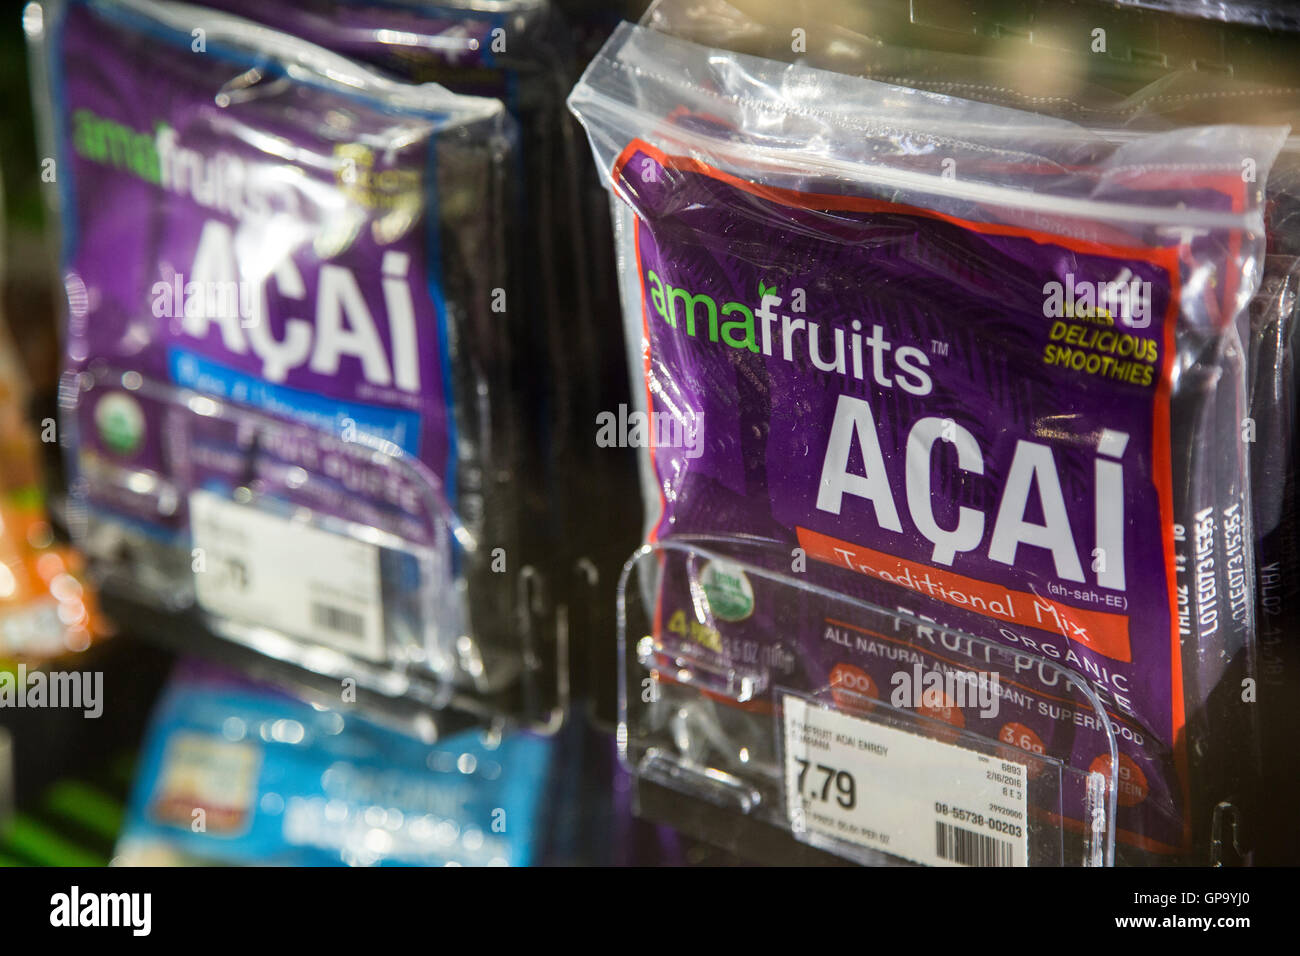 Amafruits brand acai organic fruit puree on a display at a grocery store. Stock Photo